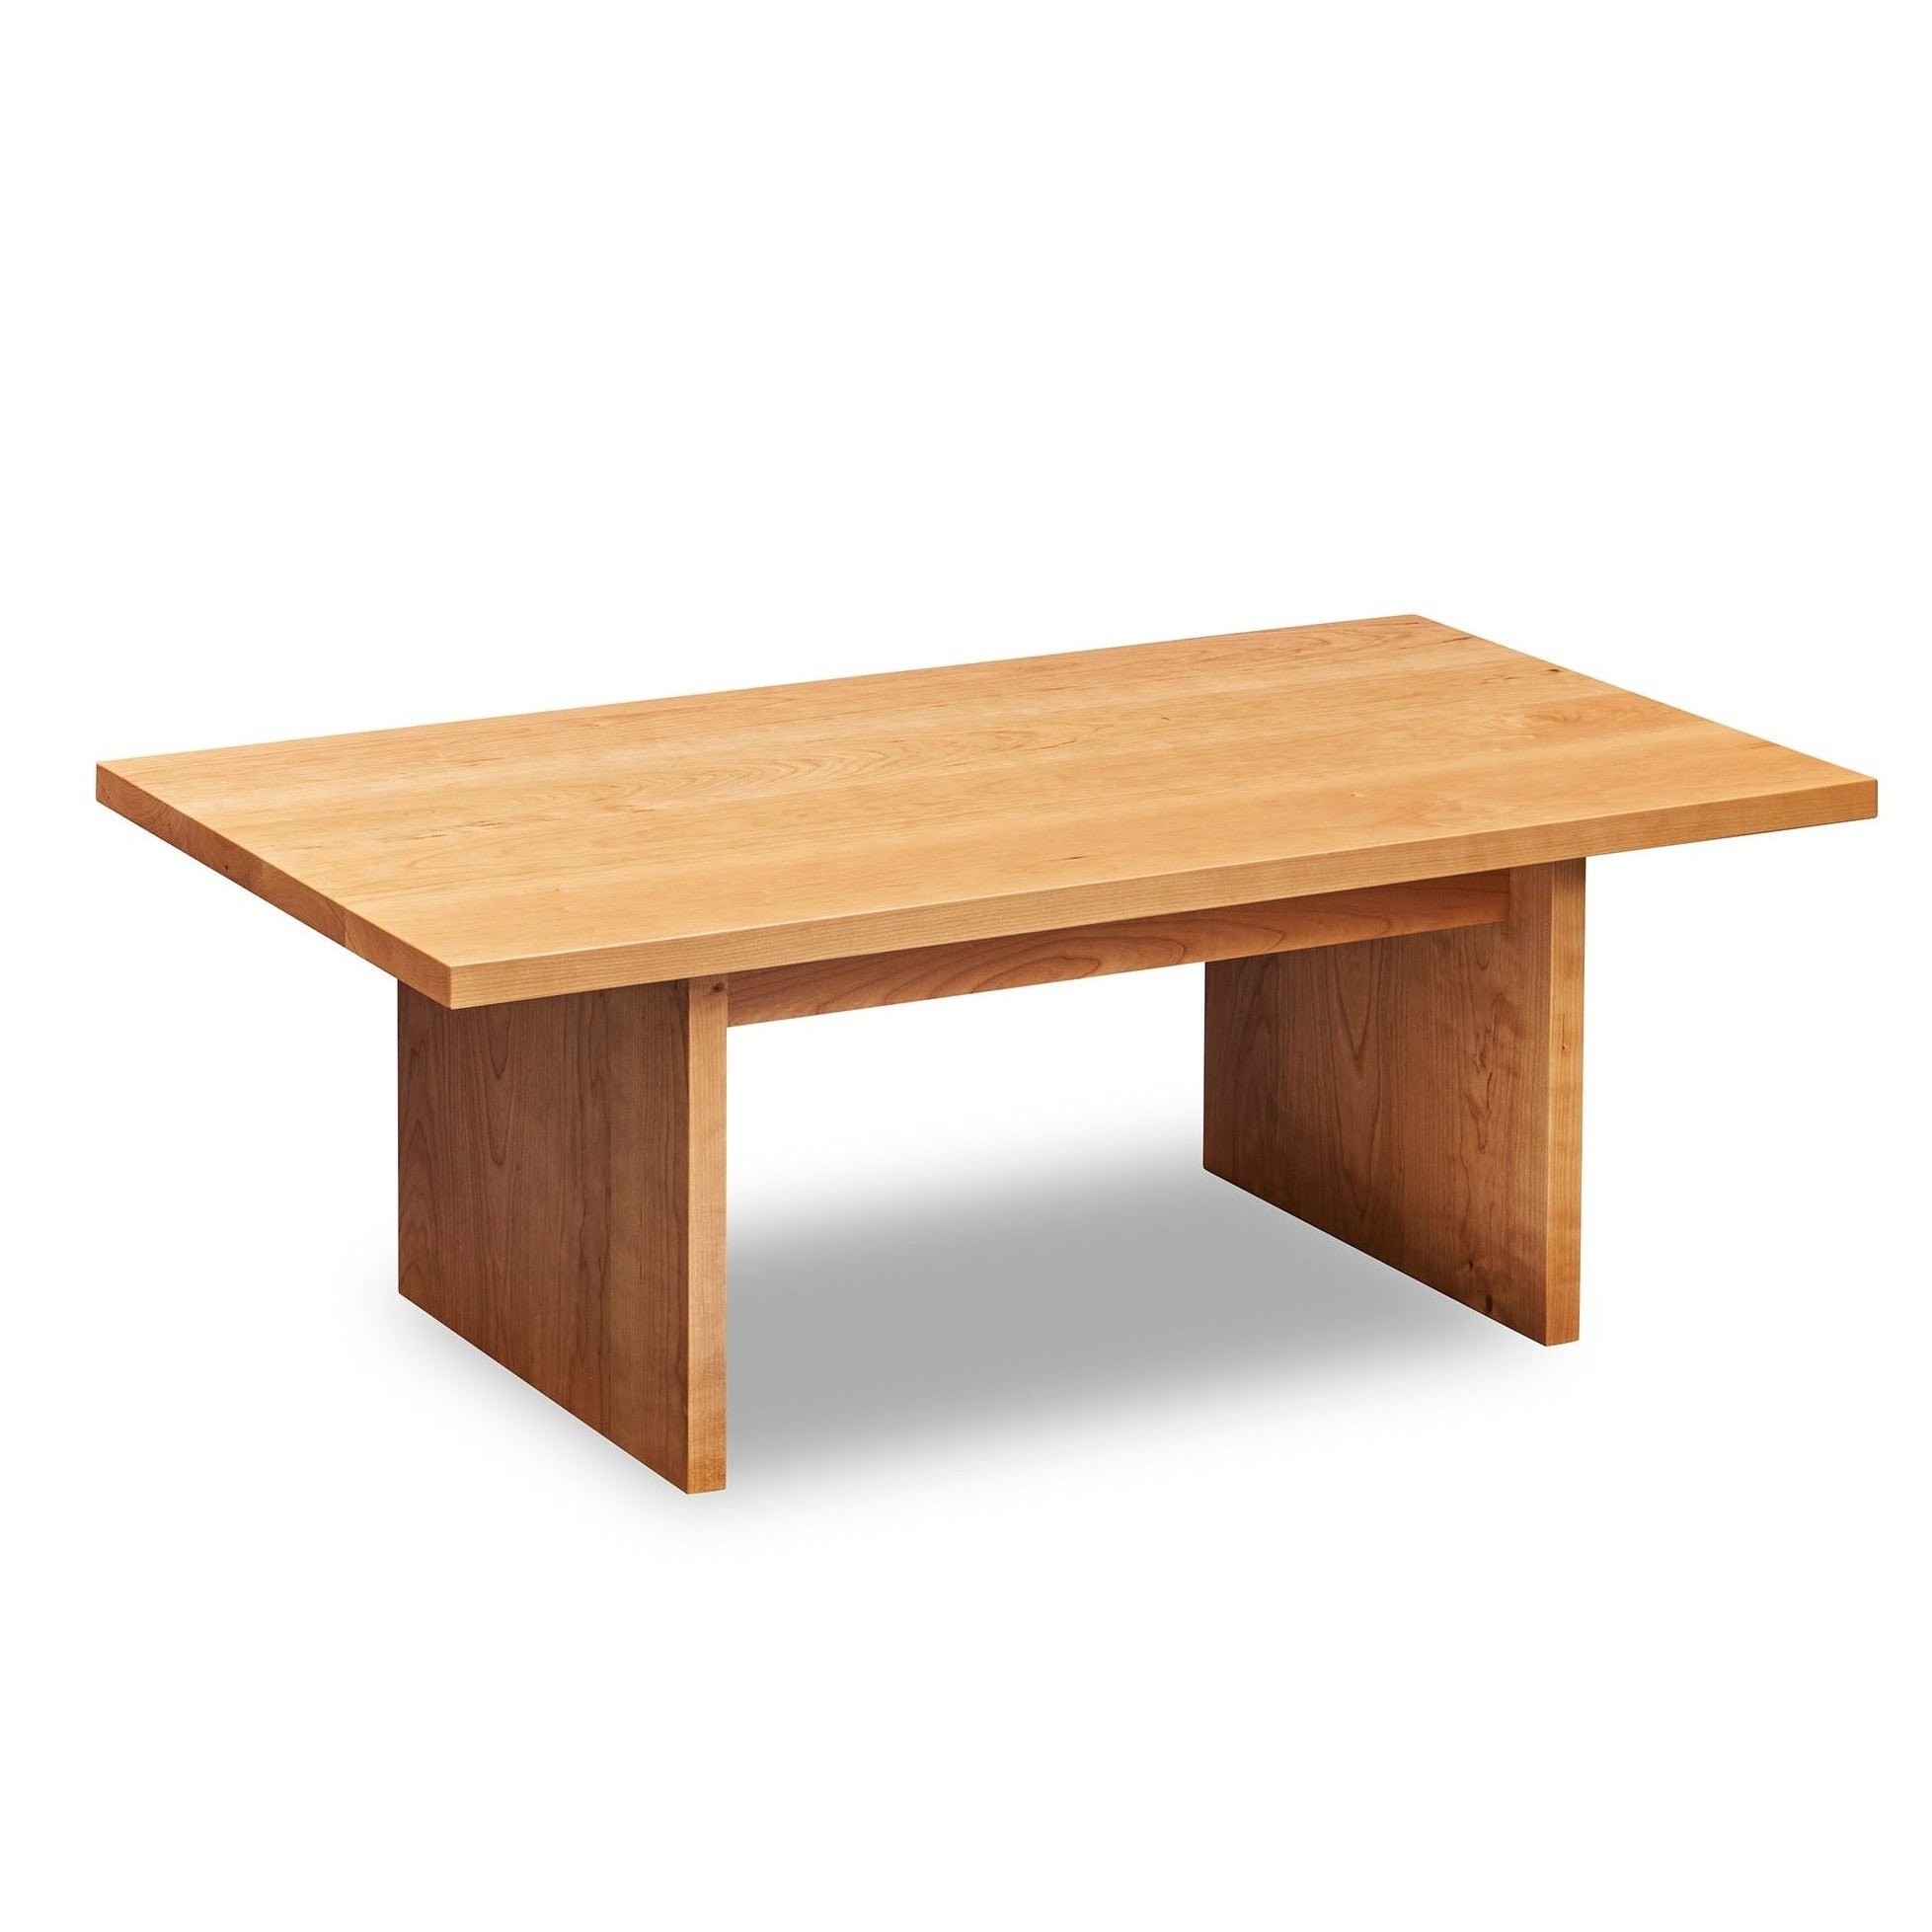 Modern handcrafted wood coffee table with trestle panel style legs in solid cherry